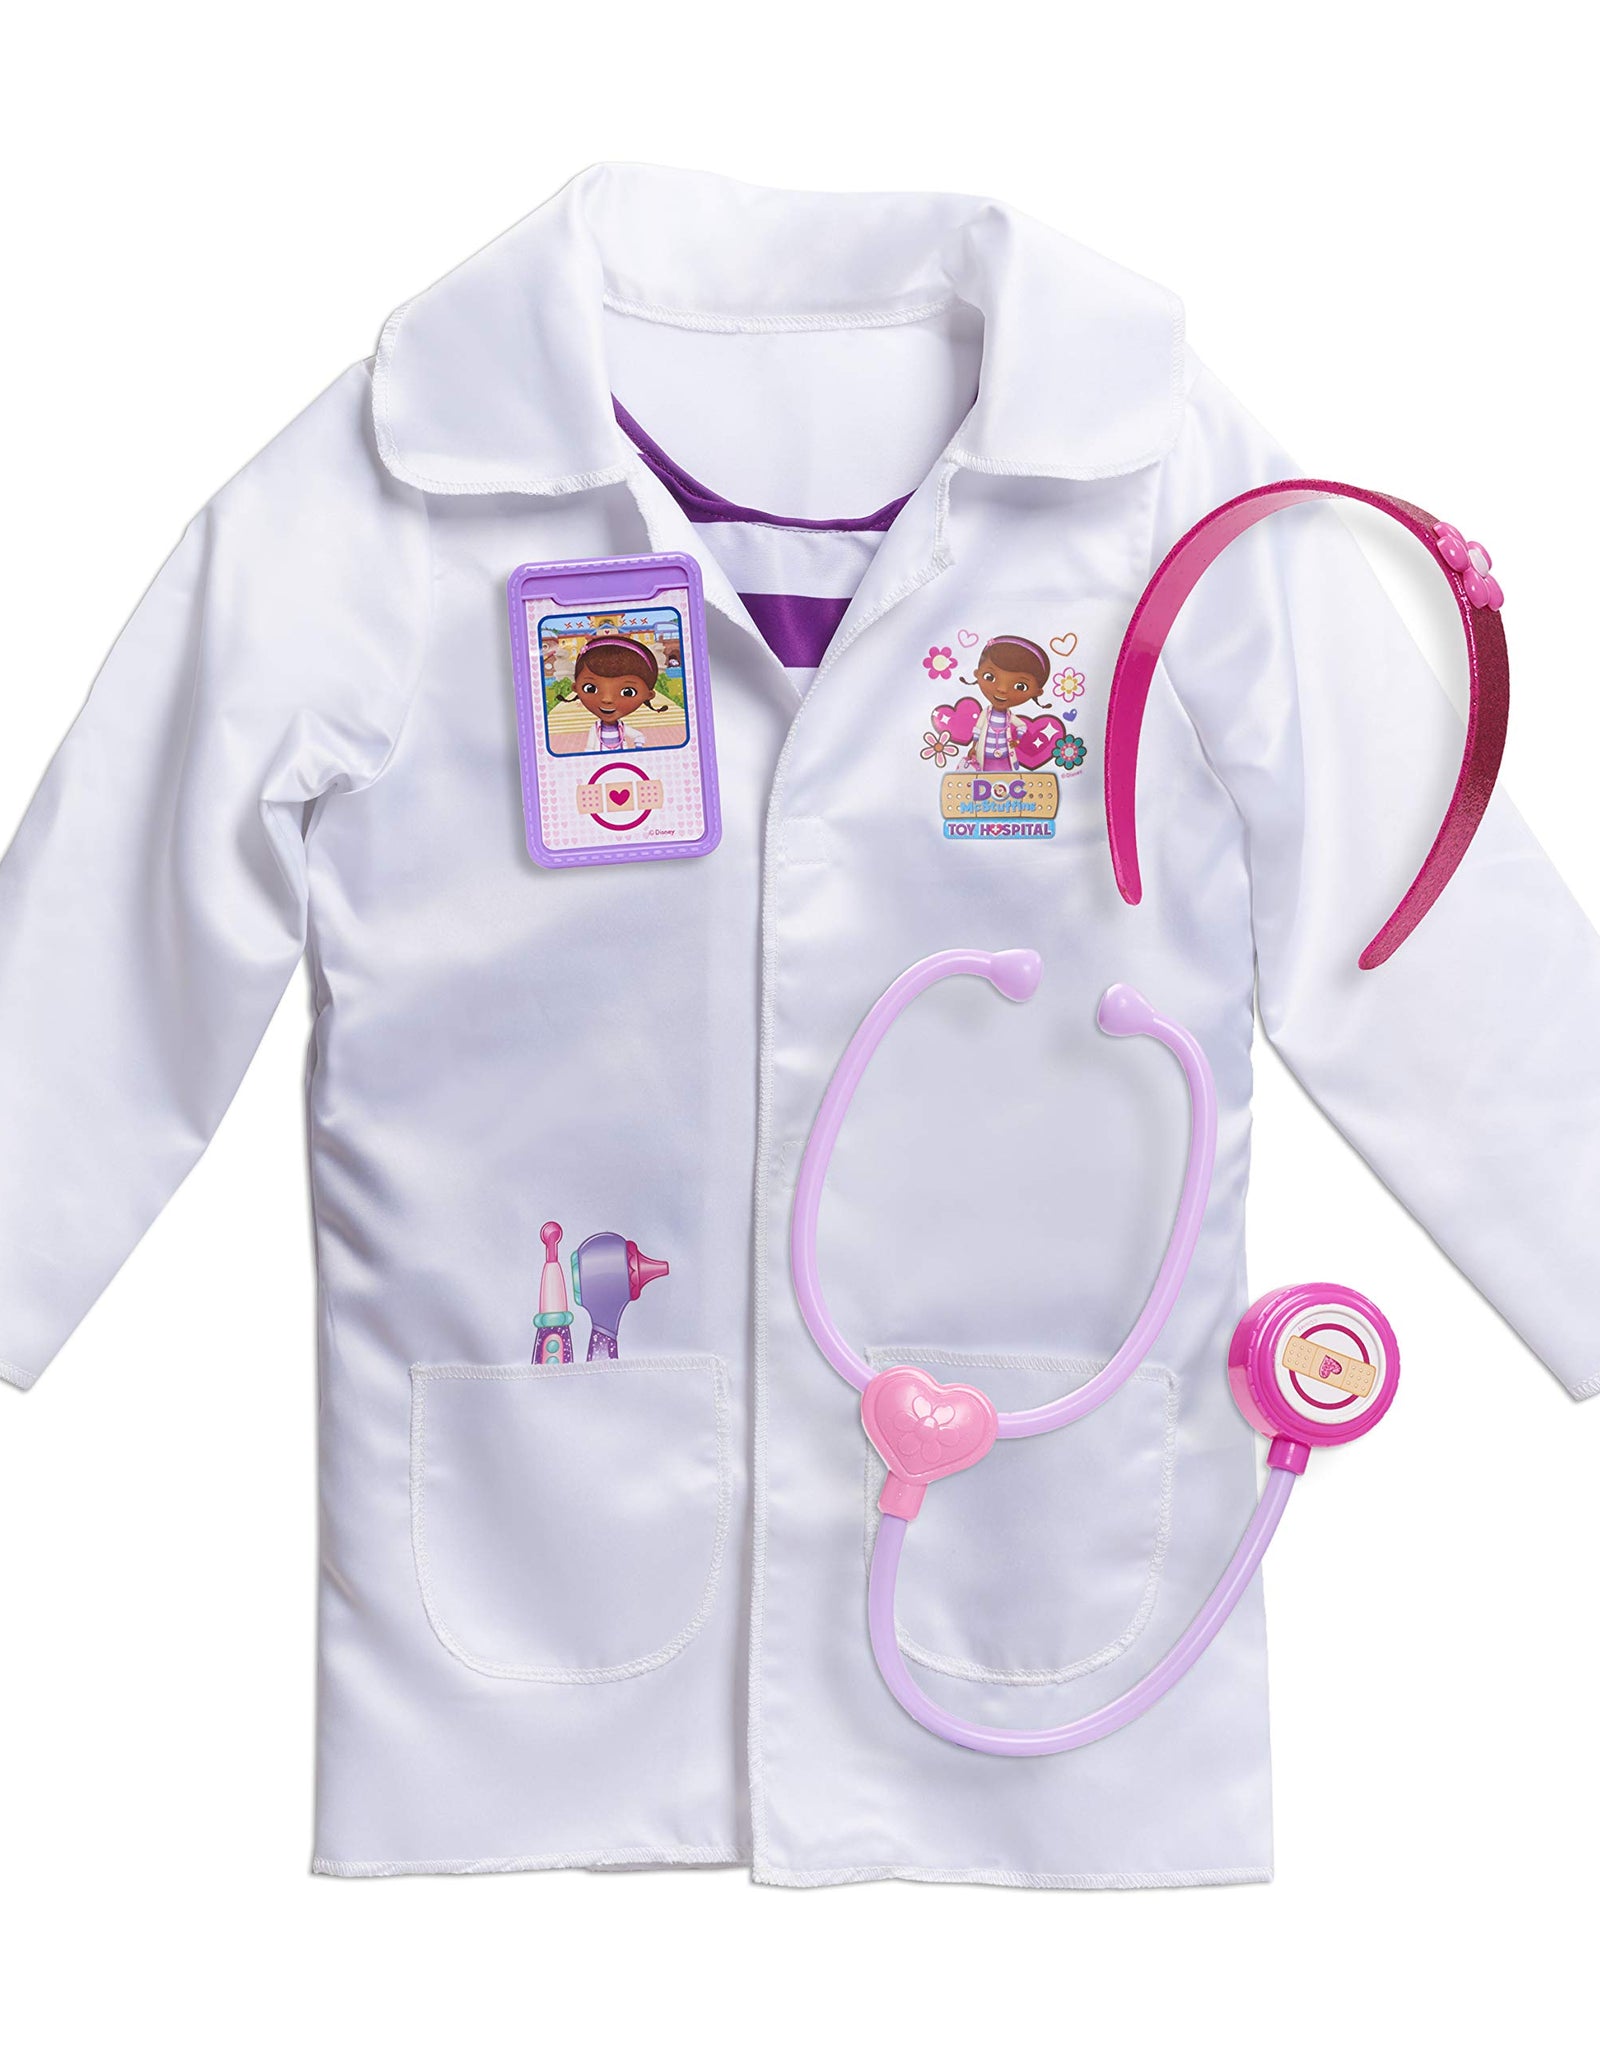 Doc McStuffins Doctor's Dress Up Set, by Just Play